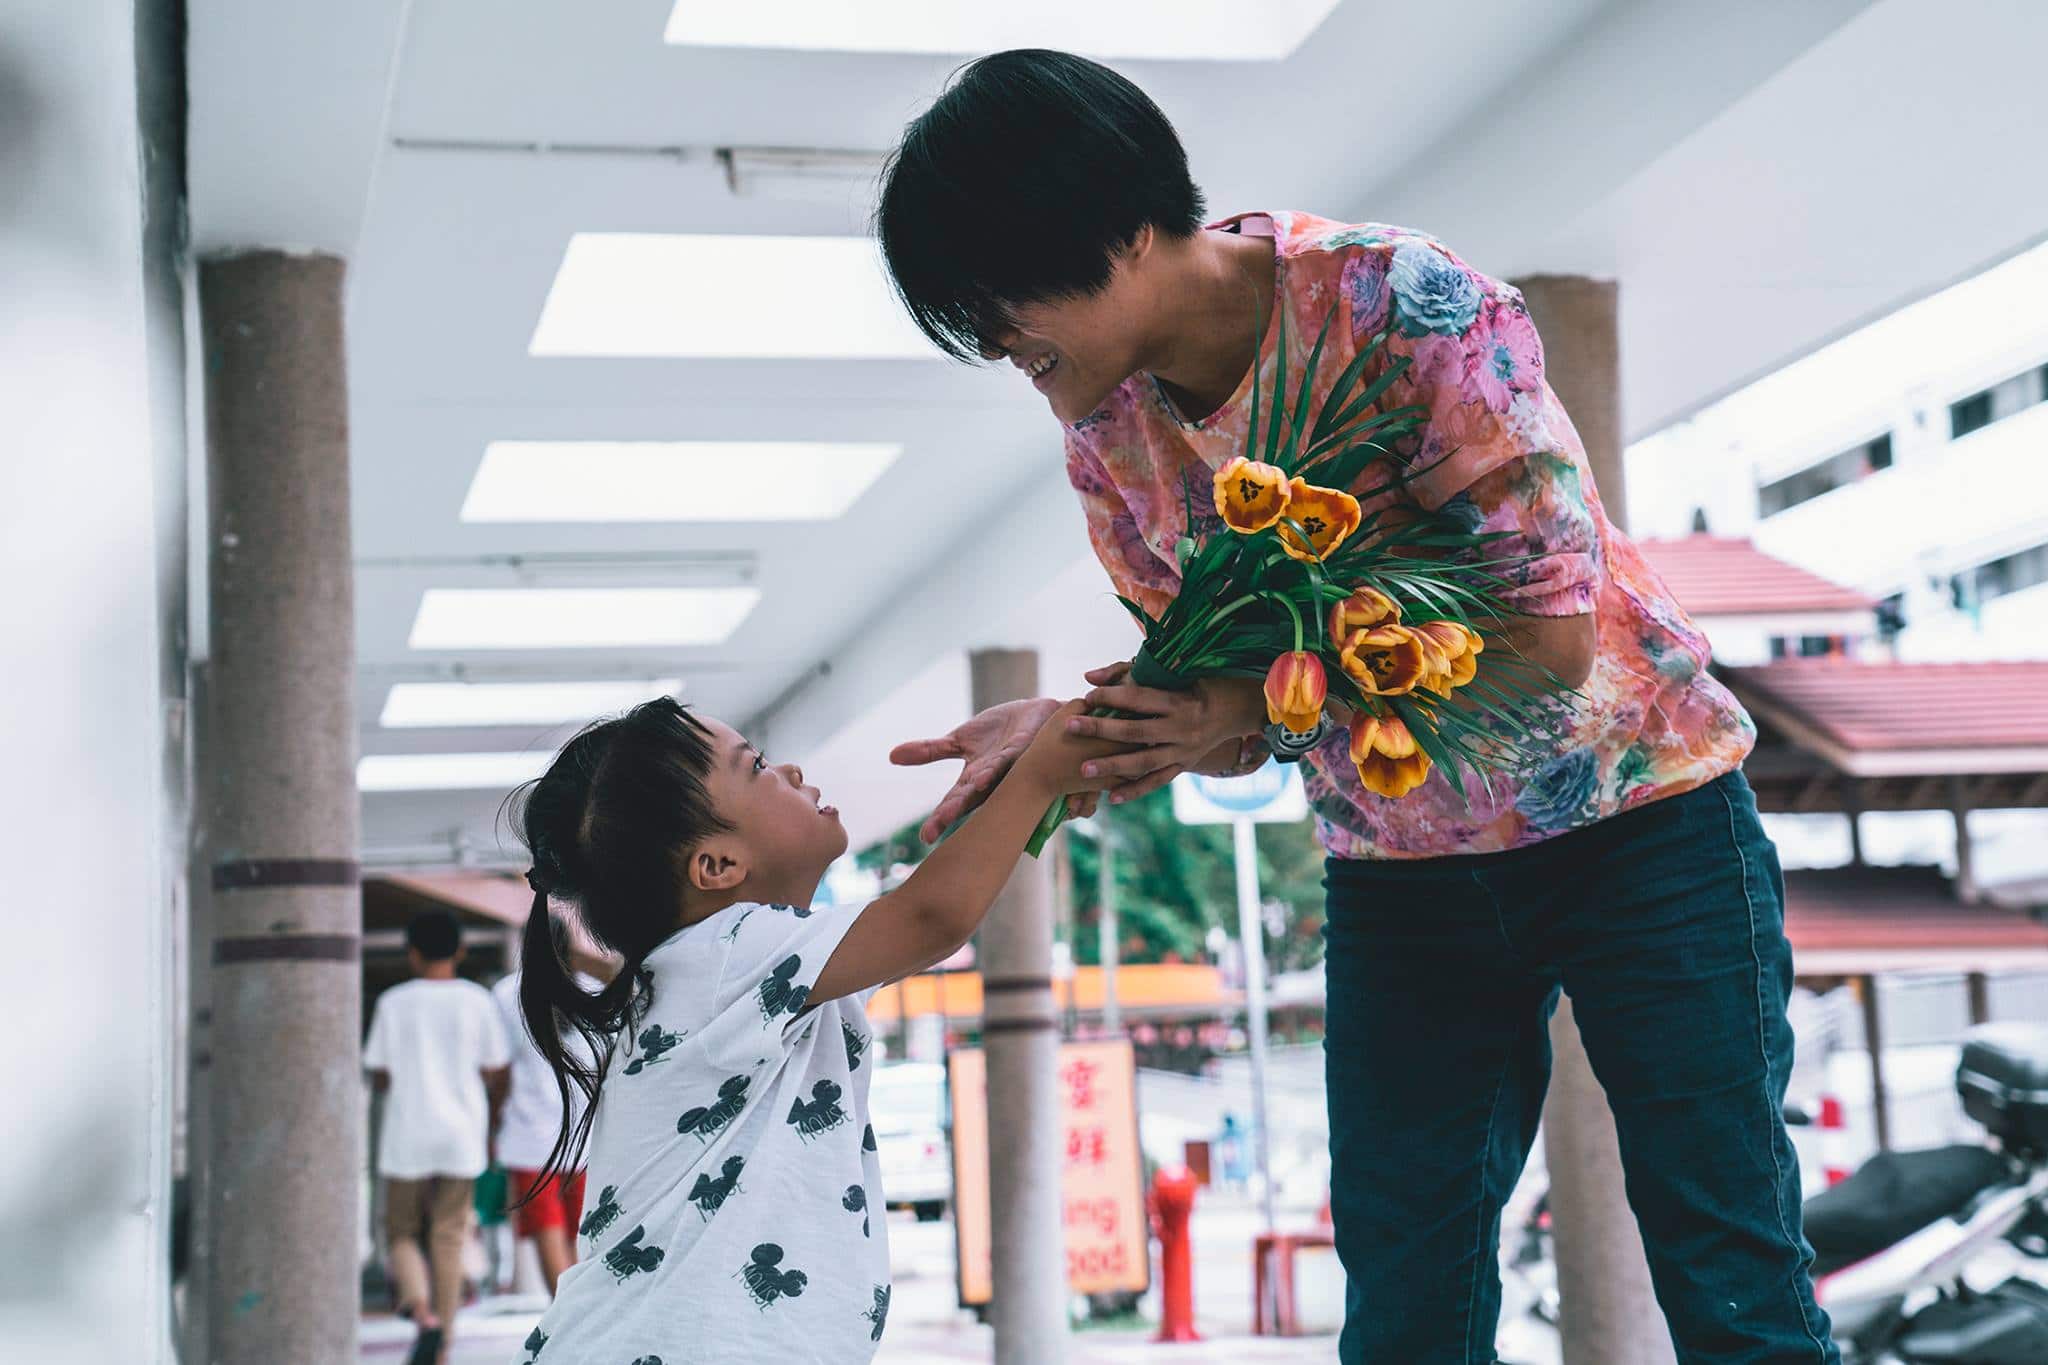 man in flowery pink shirt bending down to hand girl a bouquet of yellow flowers